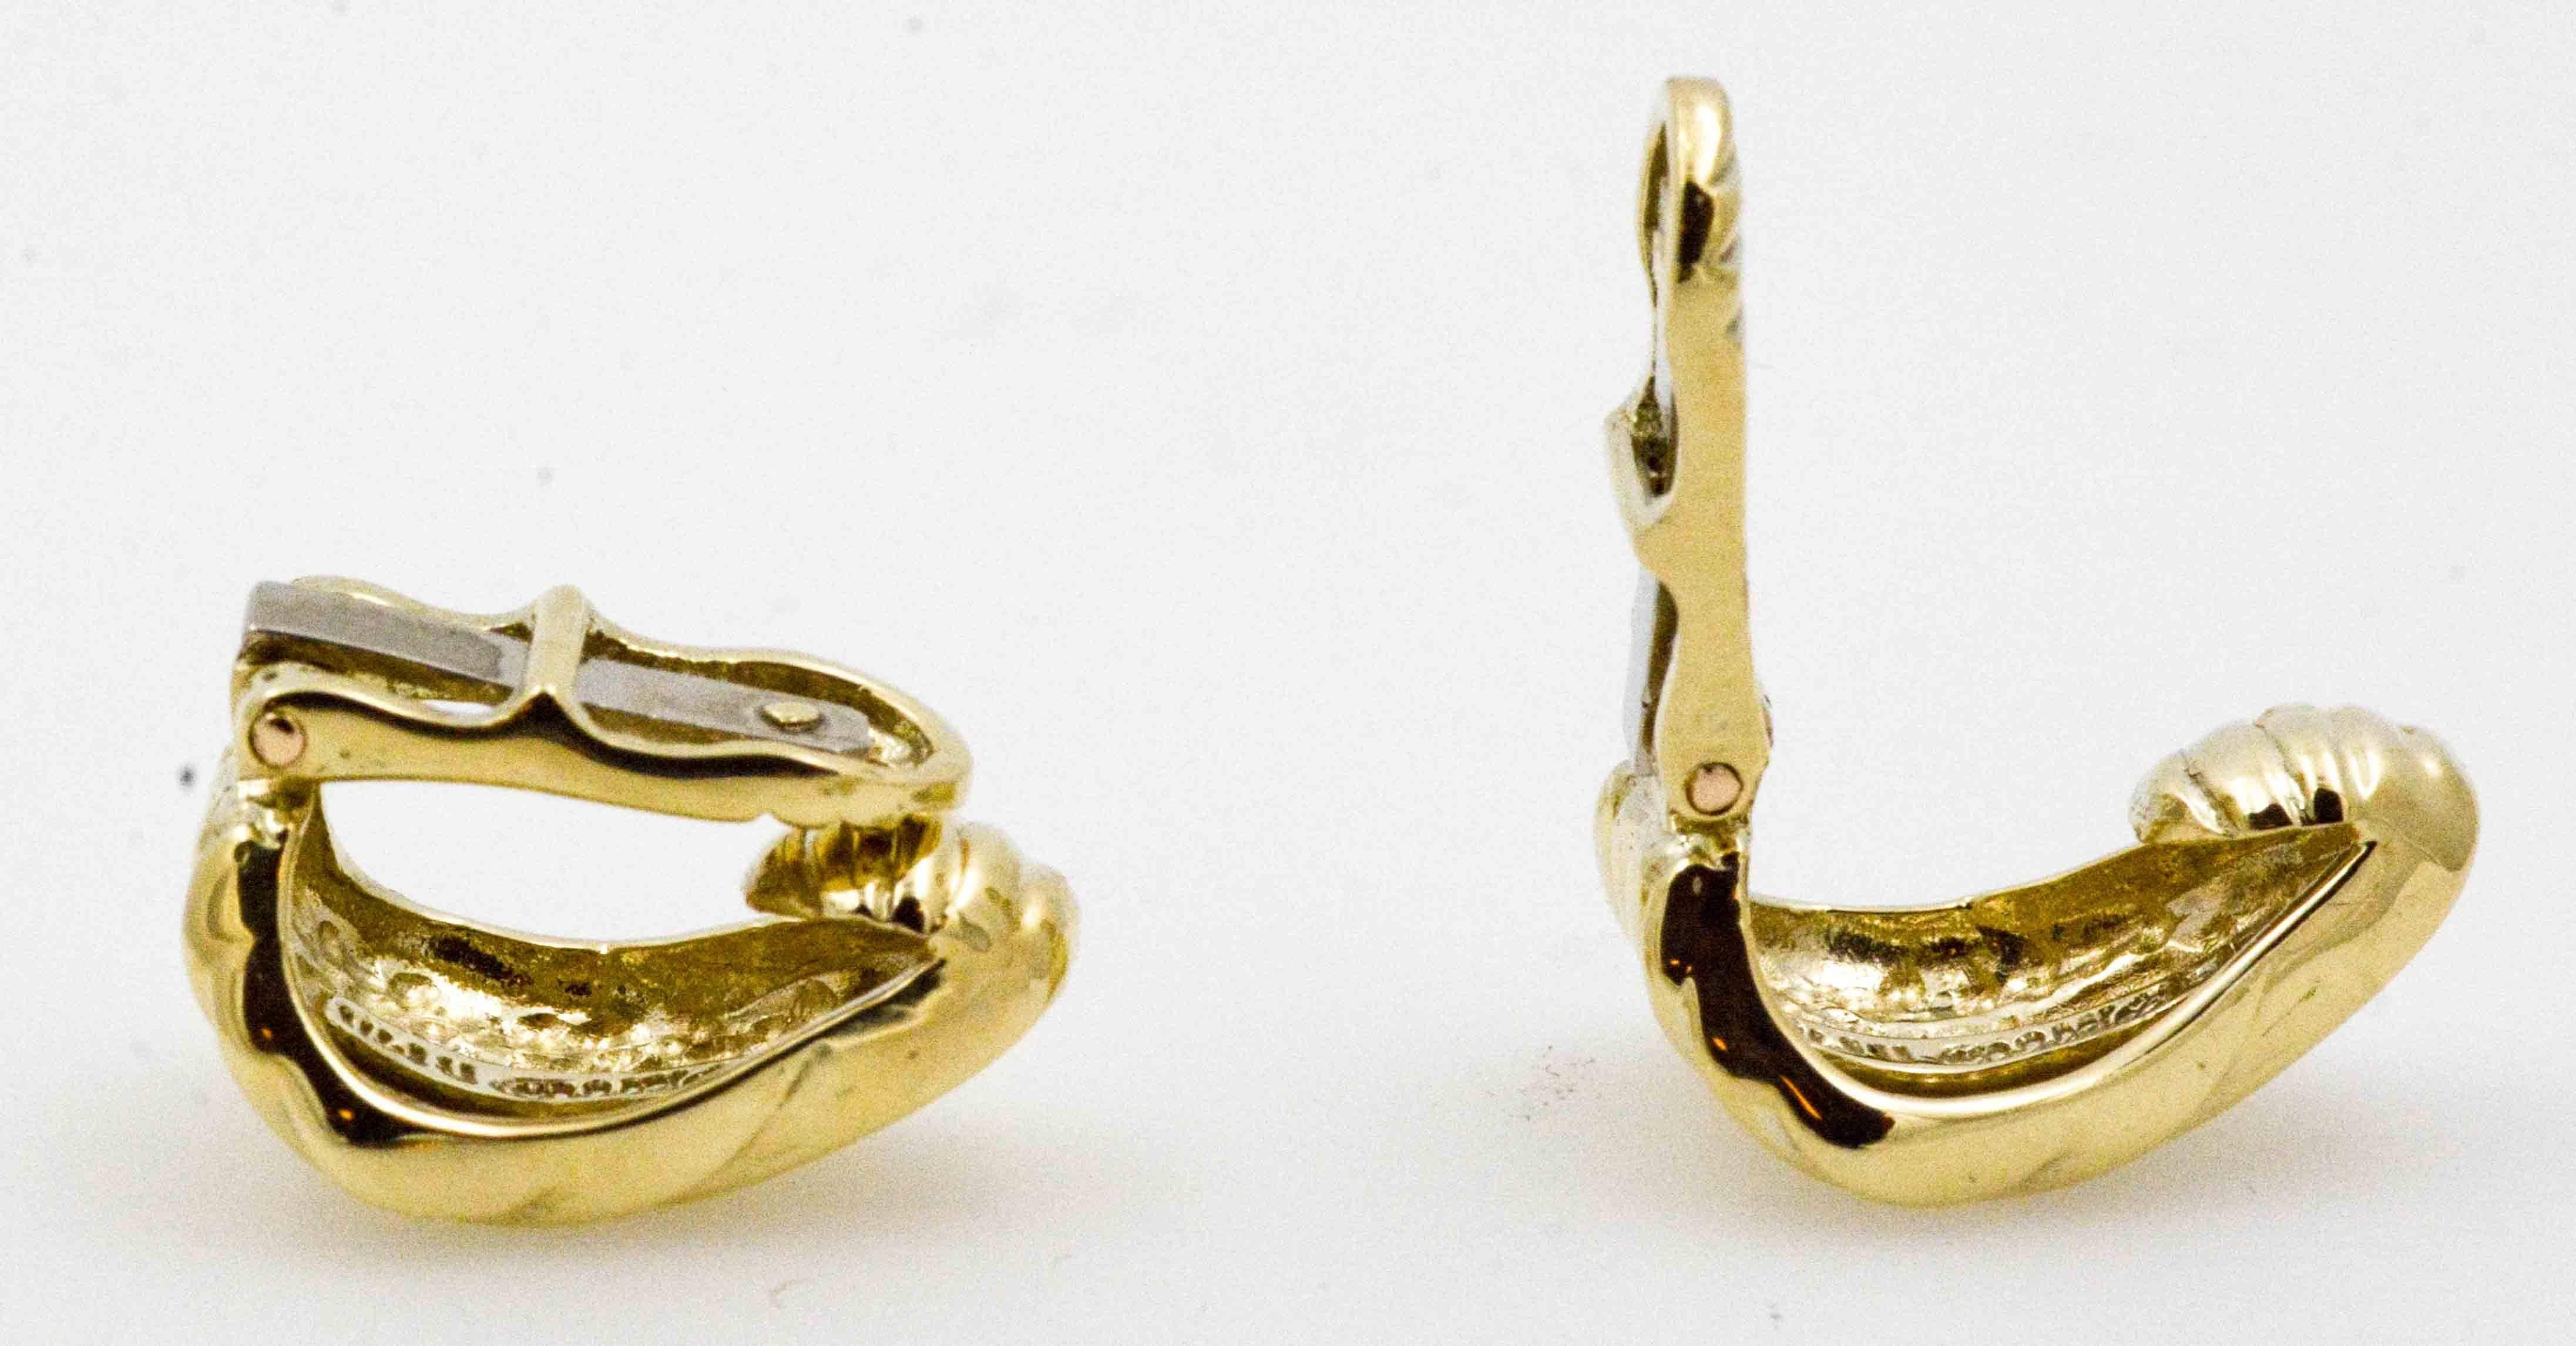 These earrings offer a bit of retro style. Clip on a classic pair of domed half hoop earrings crafted in 14 karat yellow gold. These beautiful earrings have passed our standard of quality and will certainly be a great addition to a fine jewelry